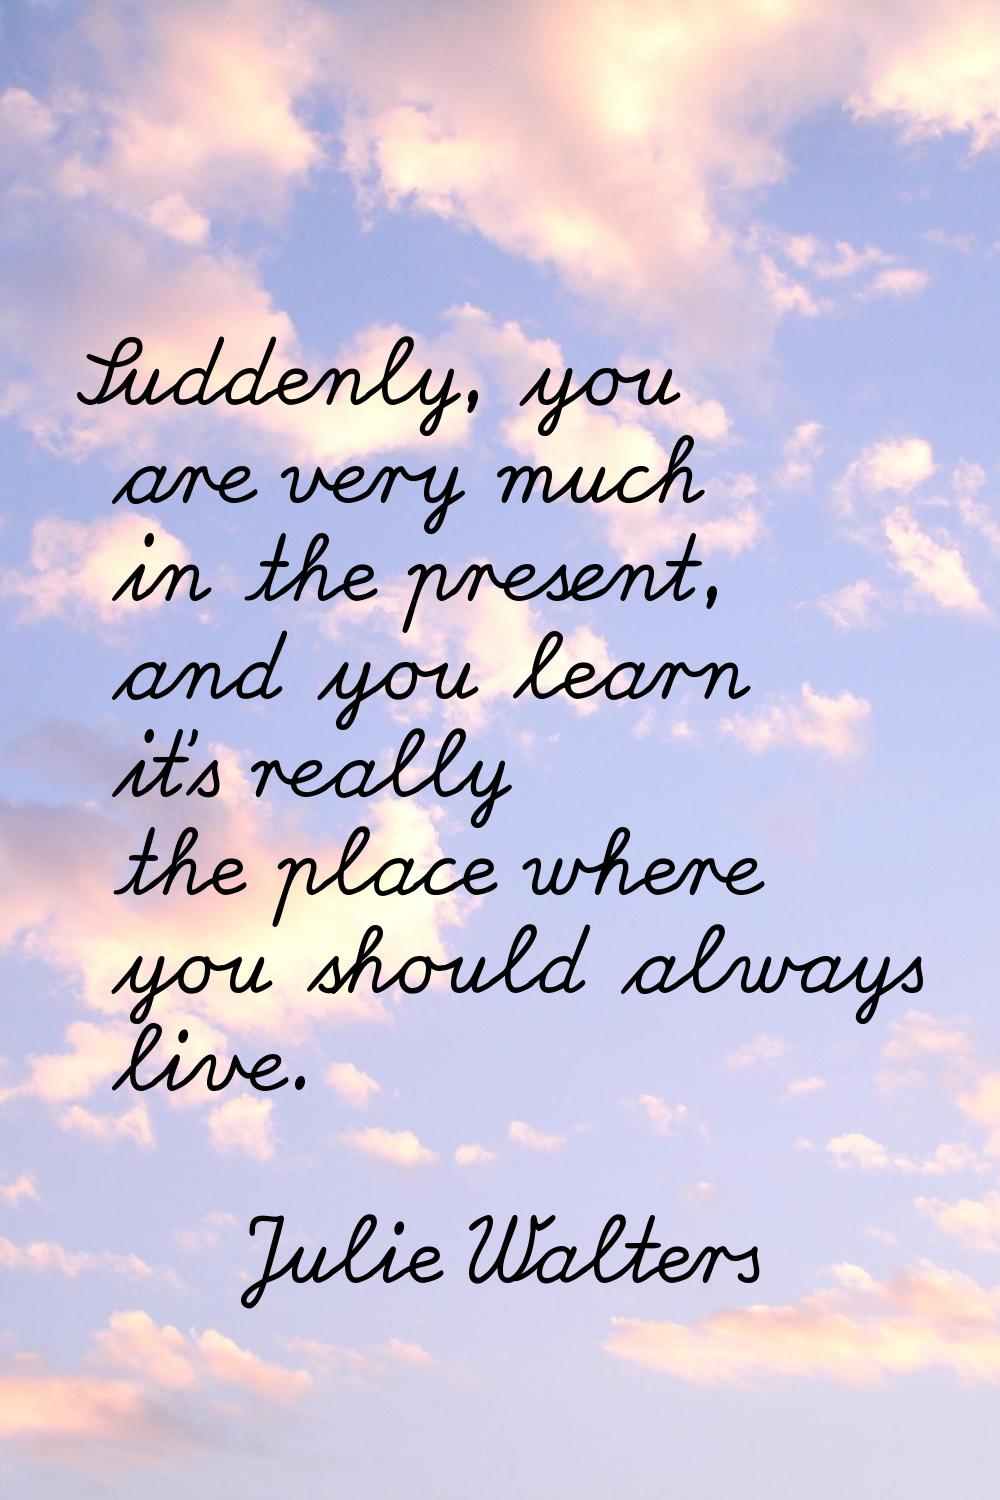 Suddenly, you are very much in the present, and you learn it's really the place where you should al